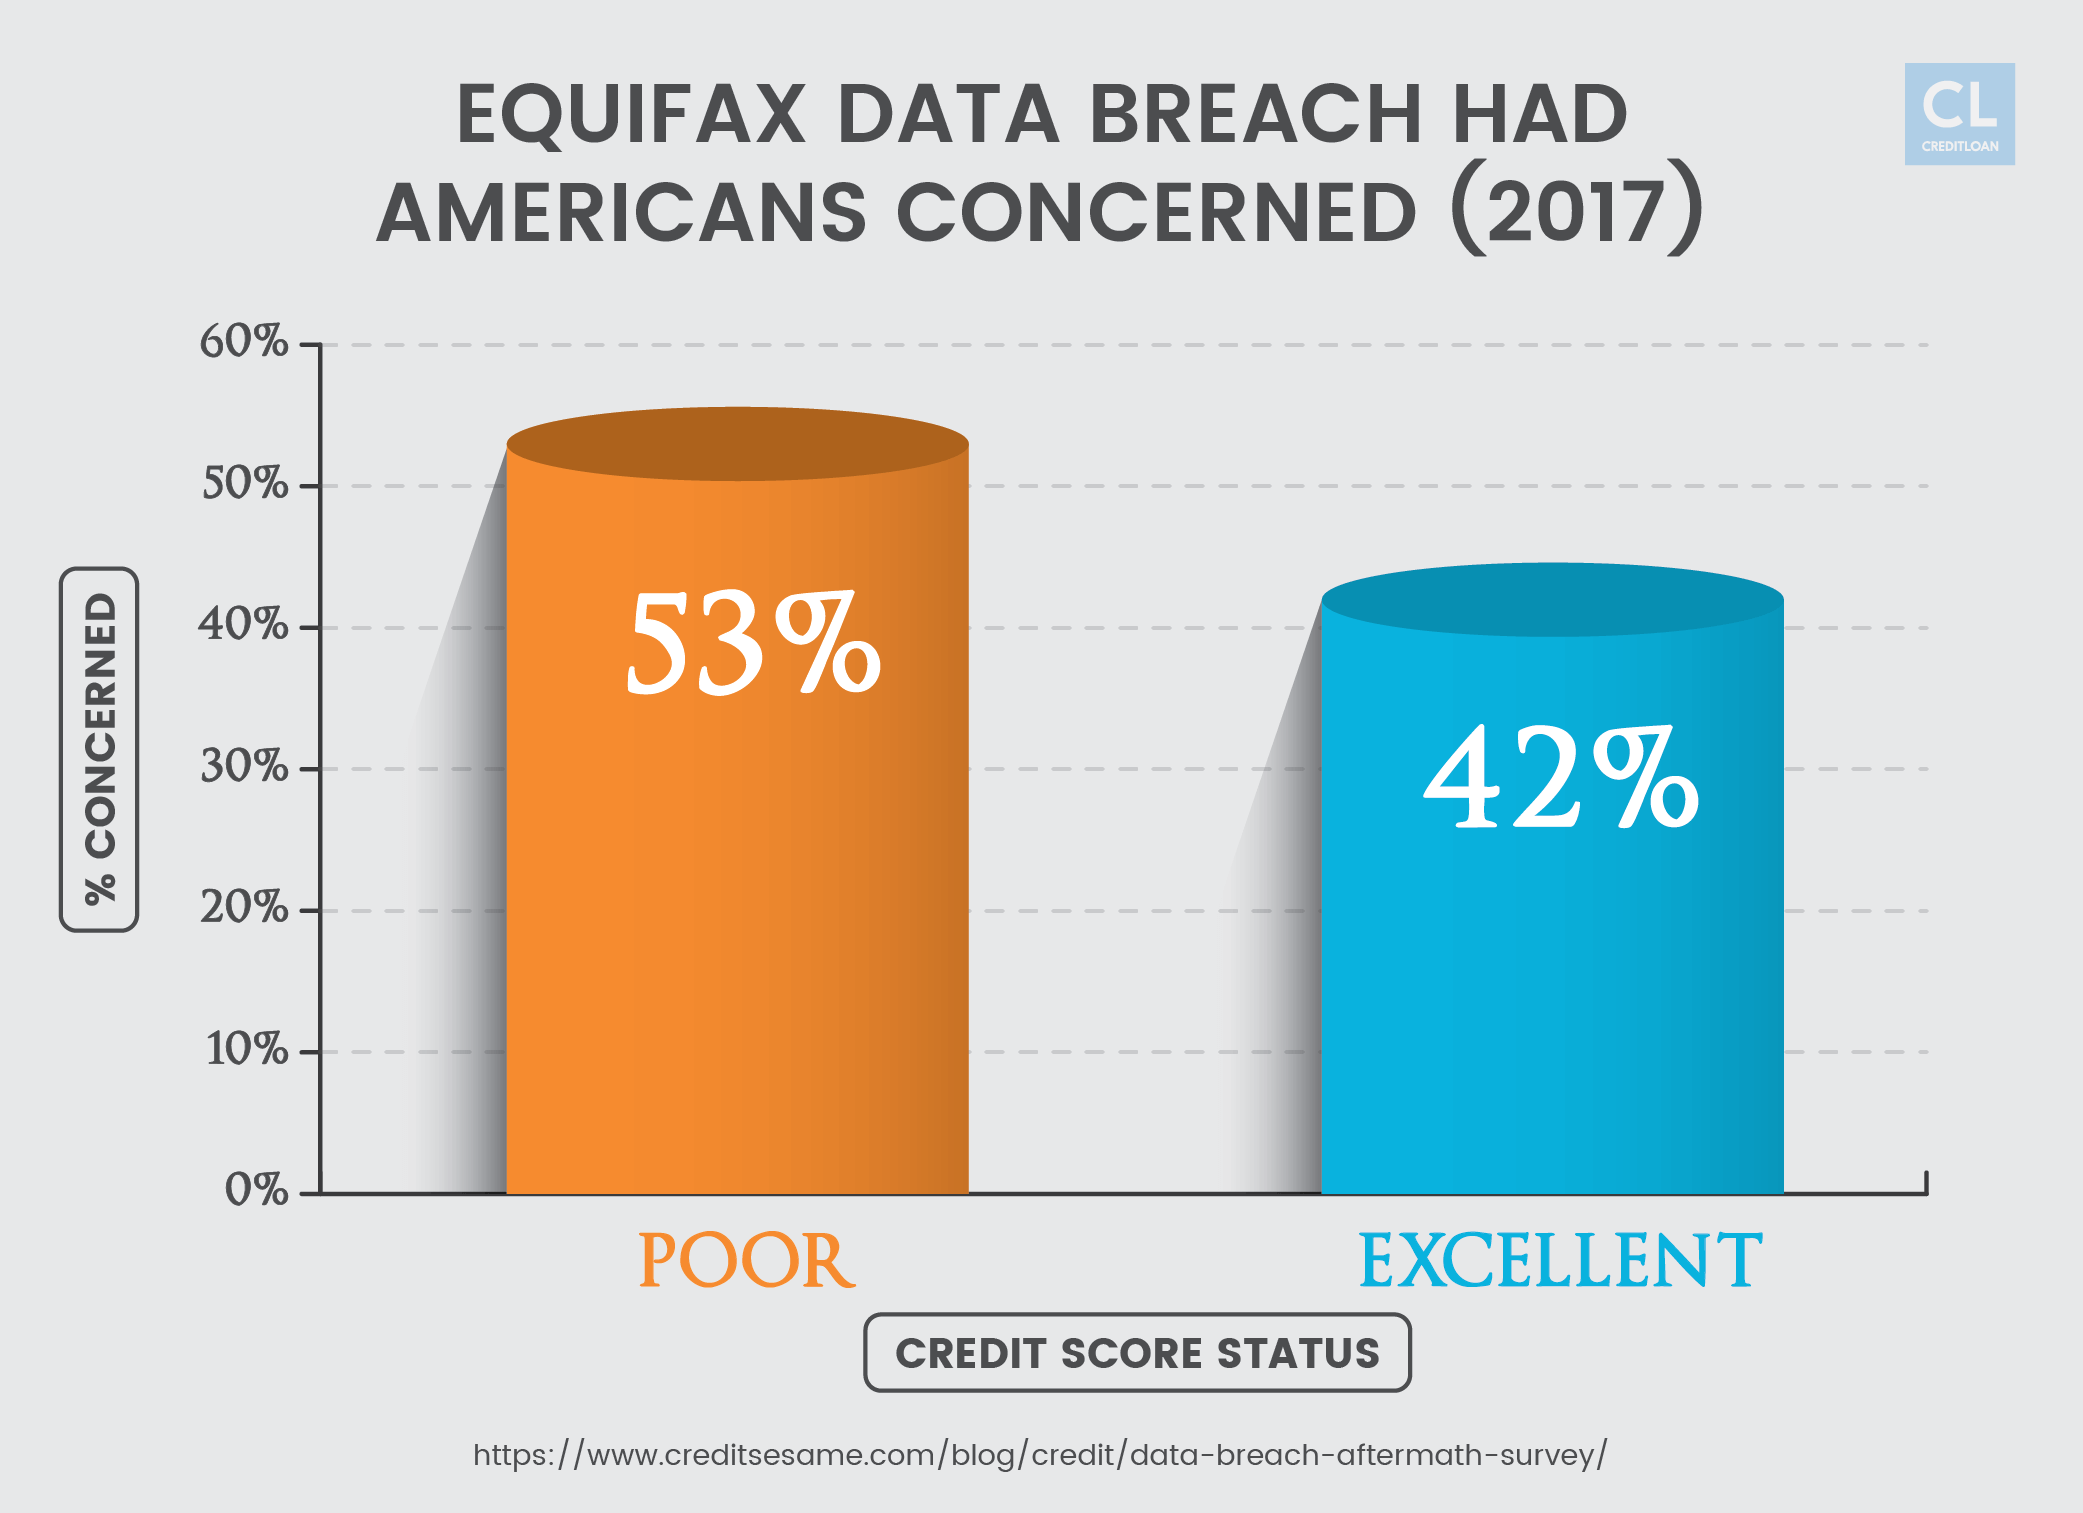 Equifax Data Breach had Americans Concerned